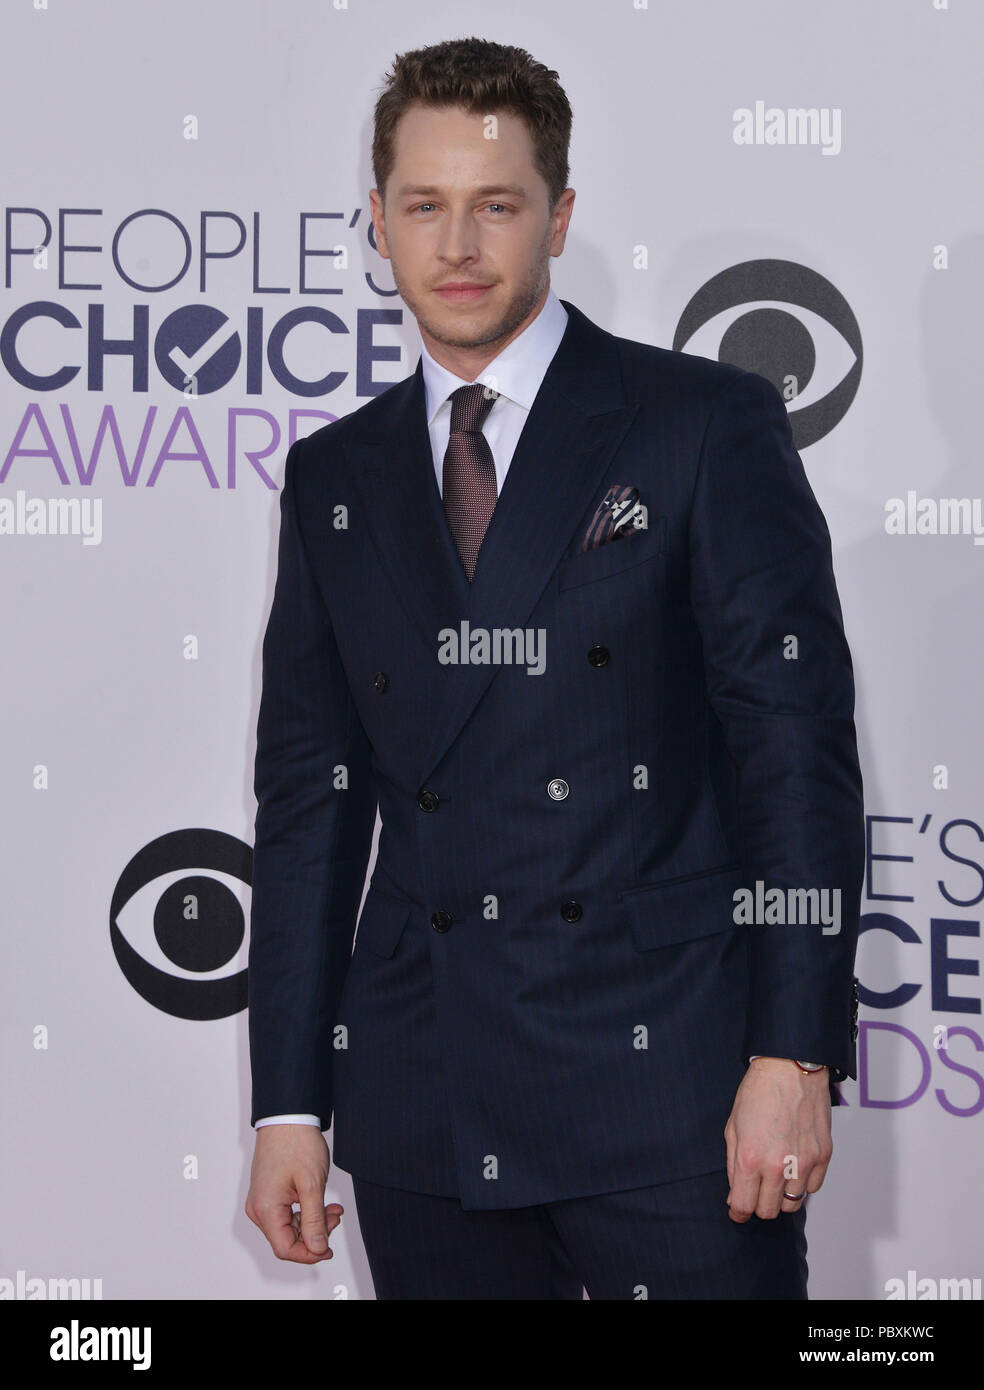 Josh Dallas at People's Choice Awards 2015 at the Nokia Theatre in Los Angeles.Josh Dallas ------------- Red Carpet Event, Vertical, USA, Film Industry, Celebrities,  Photography, Bestof, Arts Culture and Entertainment, Topix Celebrities fashion /  Vertical, Best of, Event in Hollywood Life - California,  Red Carpet and backstage, USA, Film Industry, Celebrities,  movie celebrities, TV celebrities, Music celebrities, Photography, Bestof, Arts Culture and Entertainment,  Topix, Three Quarters, vertical, one person,, from the year , 2015, inquiry tsuni@Gamma-USA.com Stock Photo